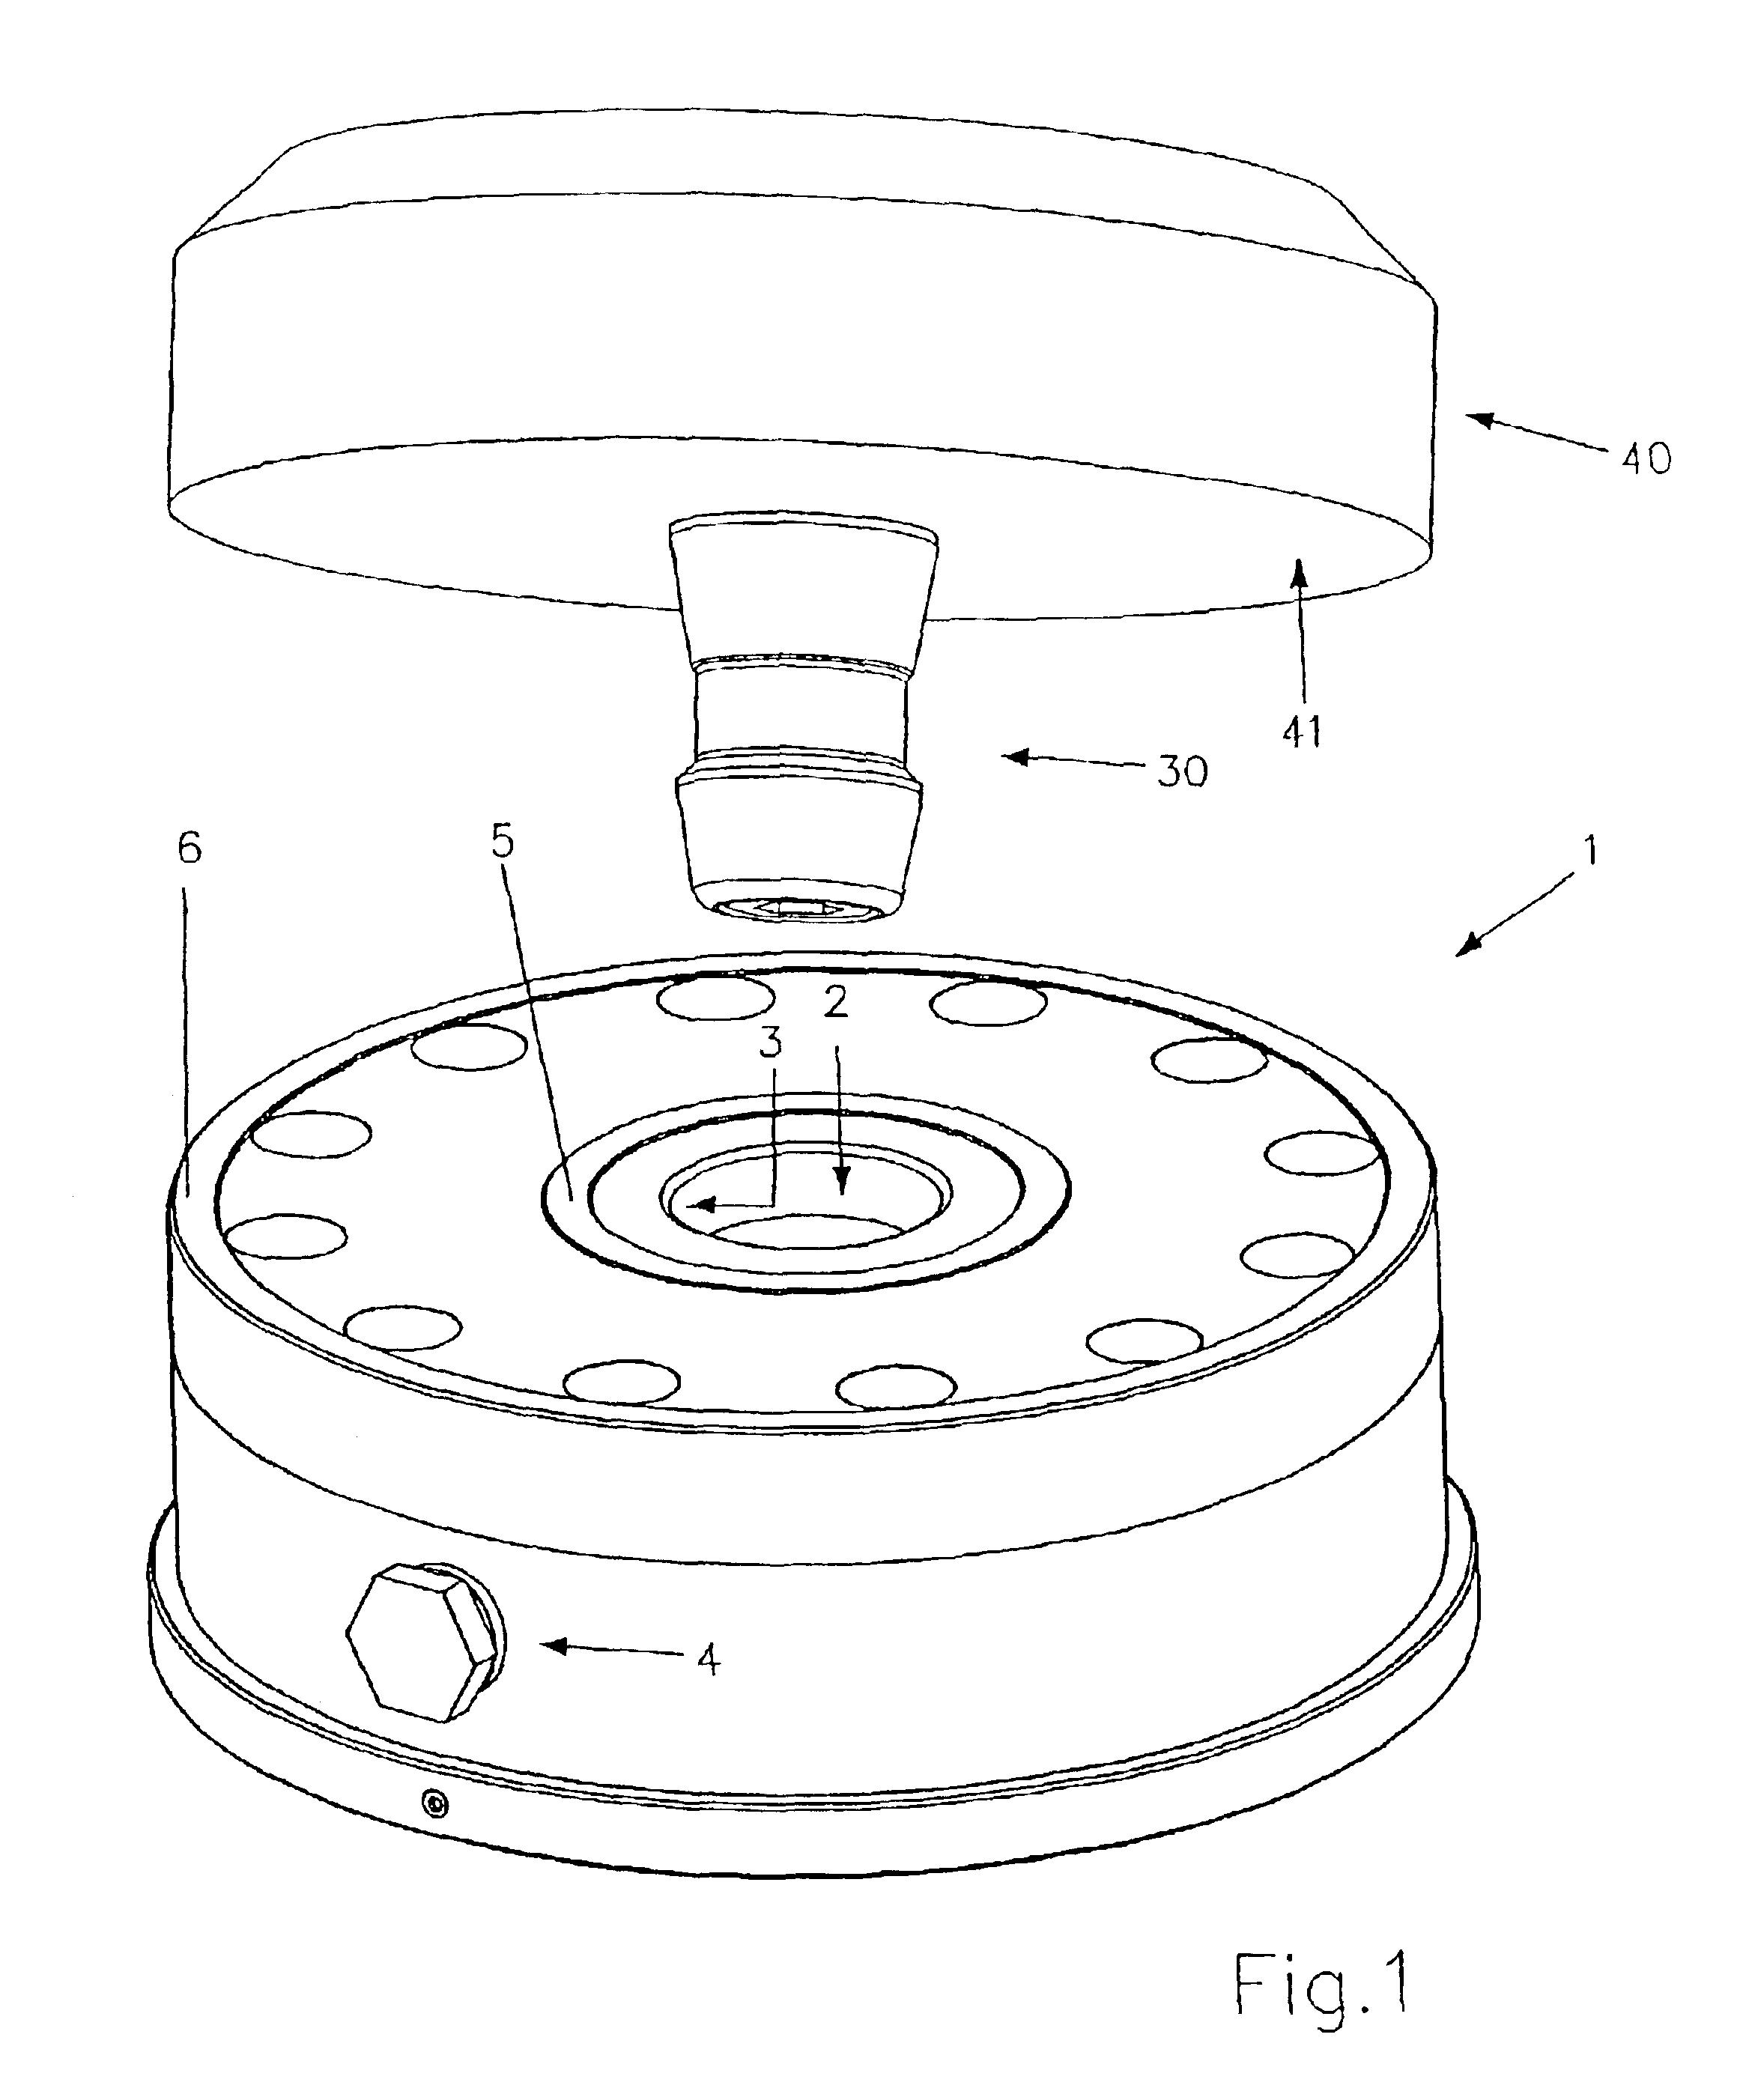 Clamping apparatus with a clamping chuck and a work piece carrier releasably connectable thereto